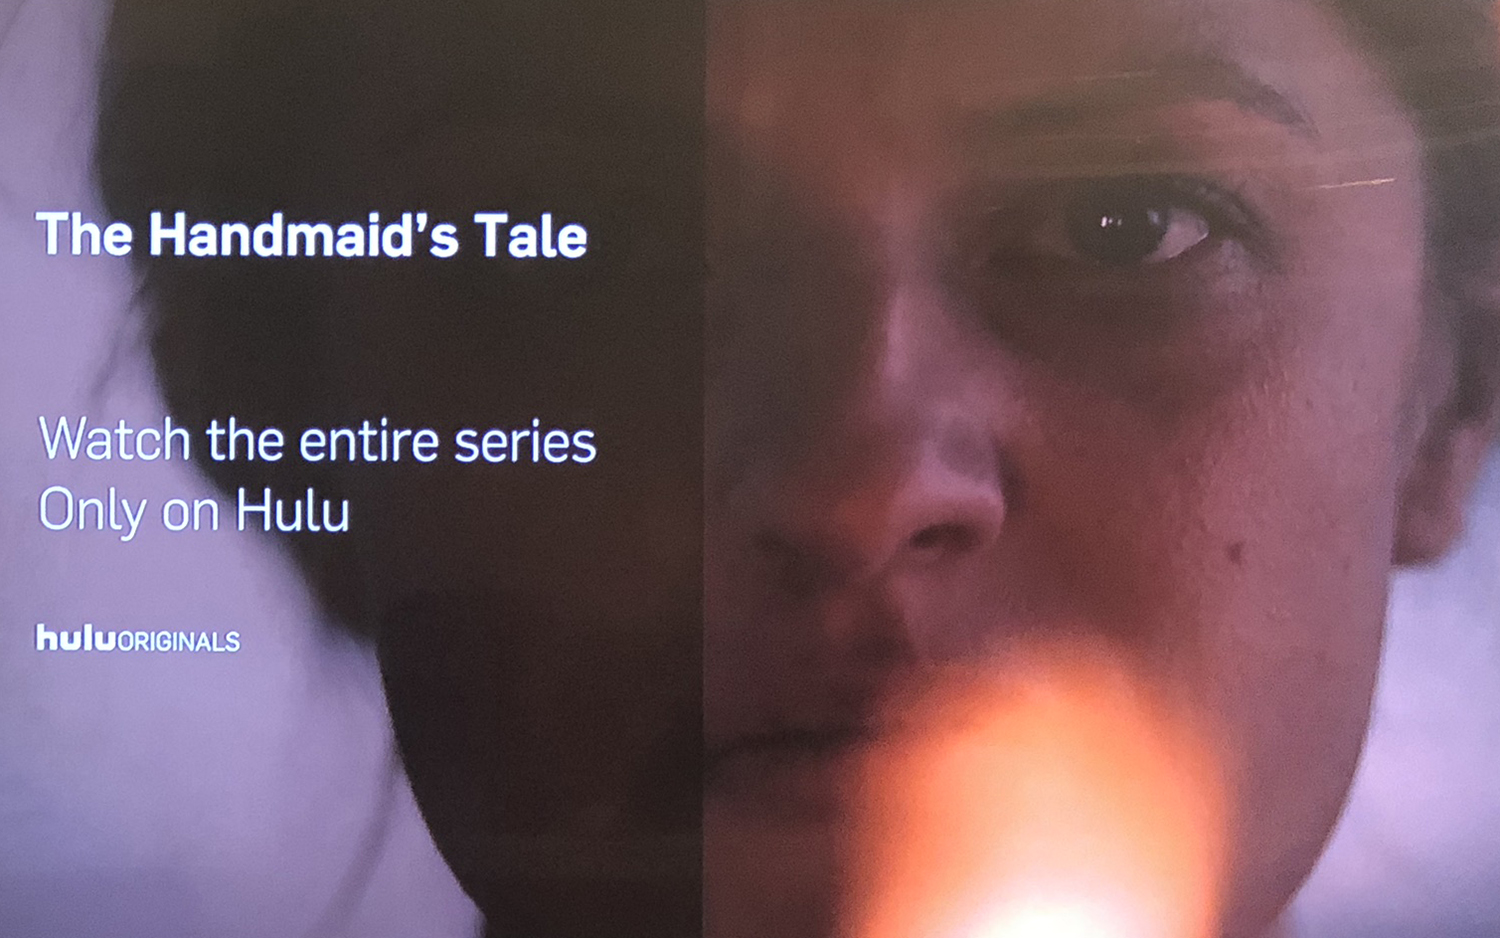 The Fire Stick interface with The Handmaid's Tale playing